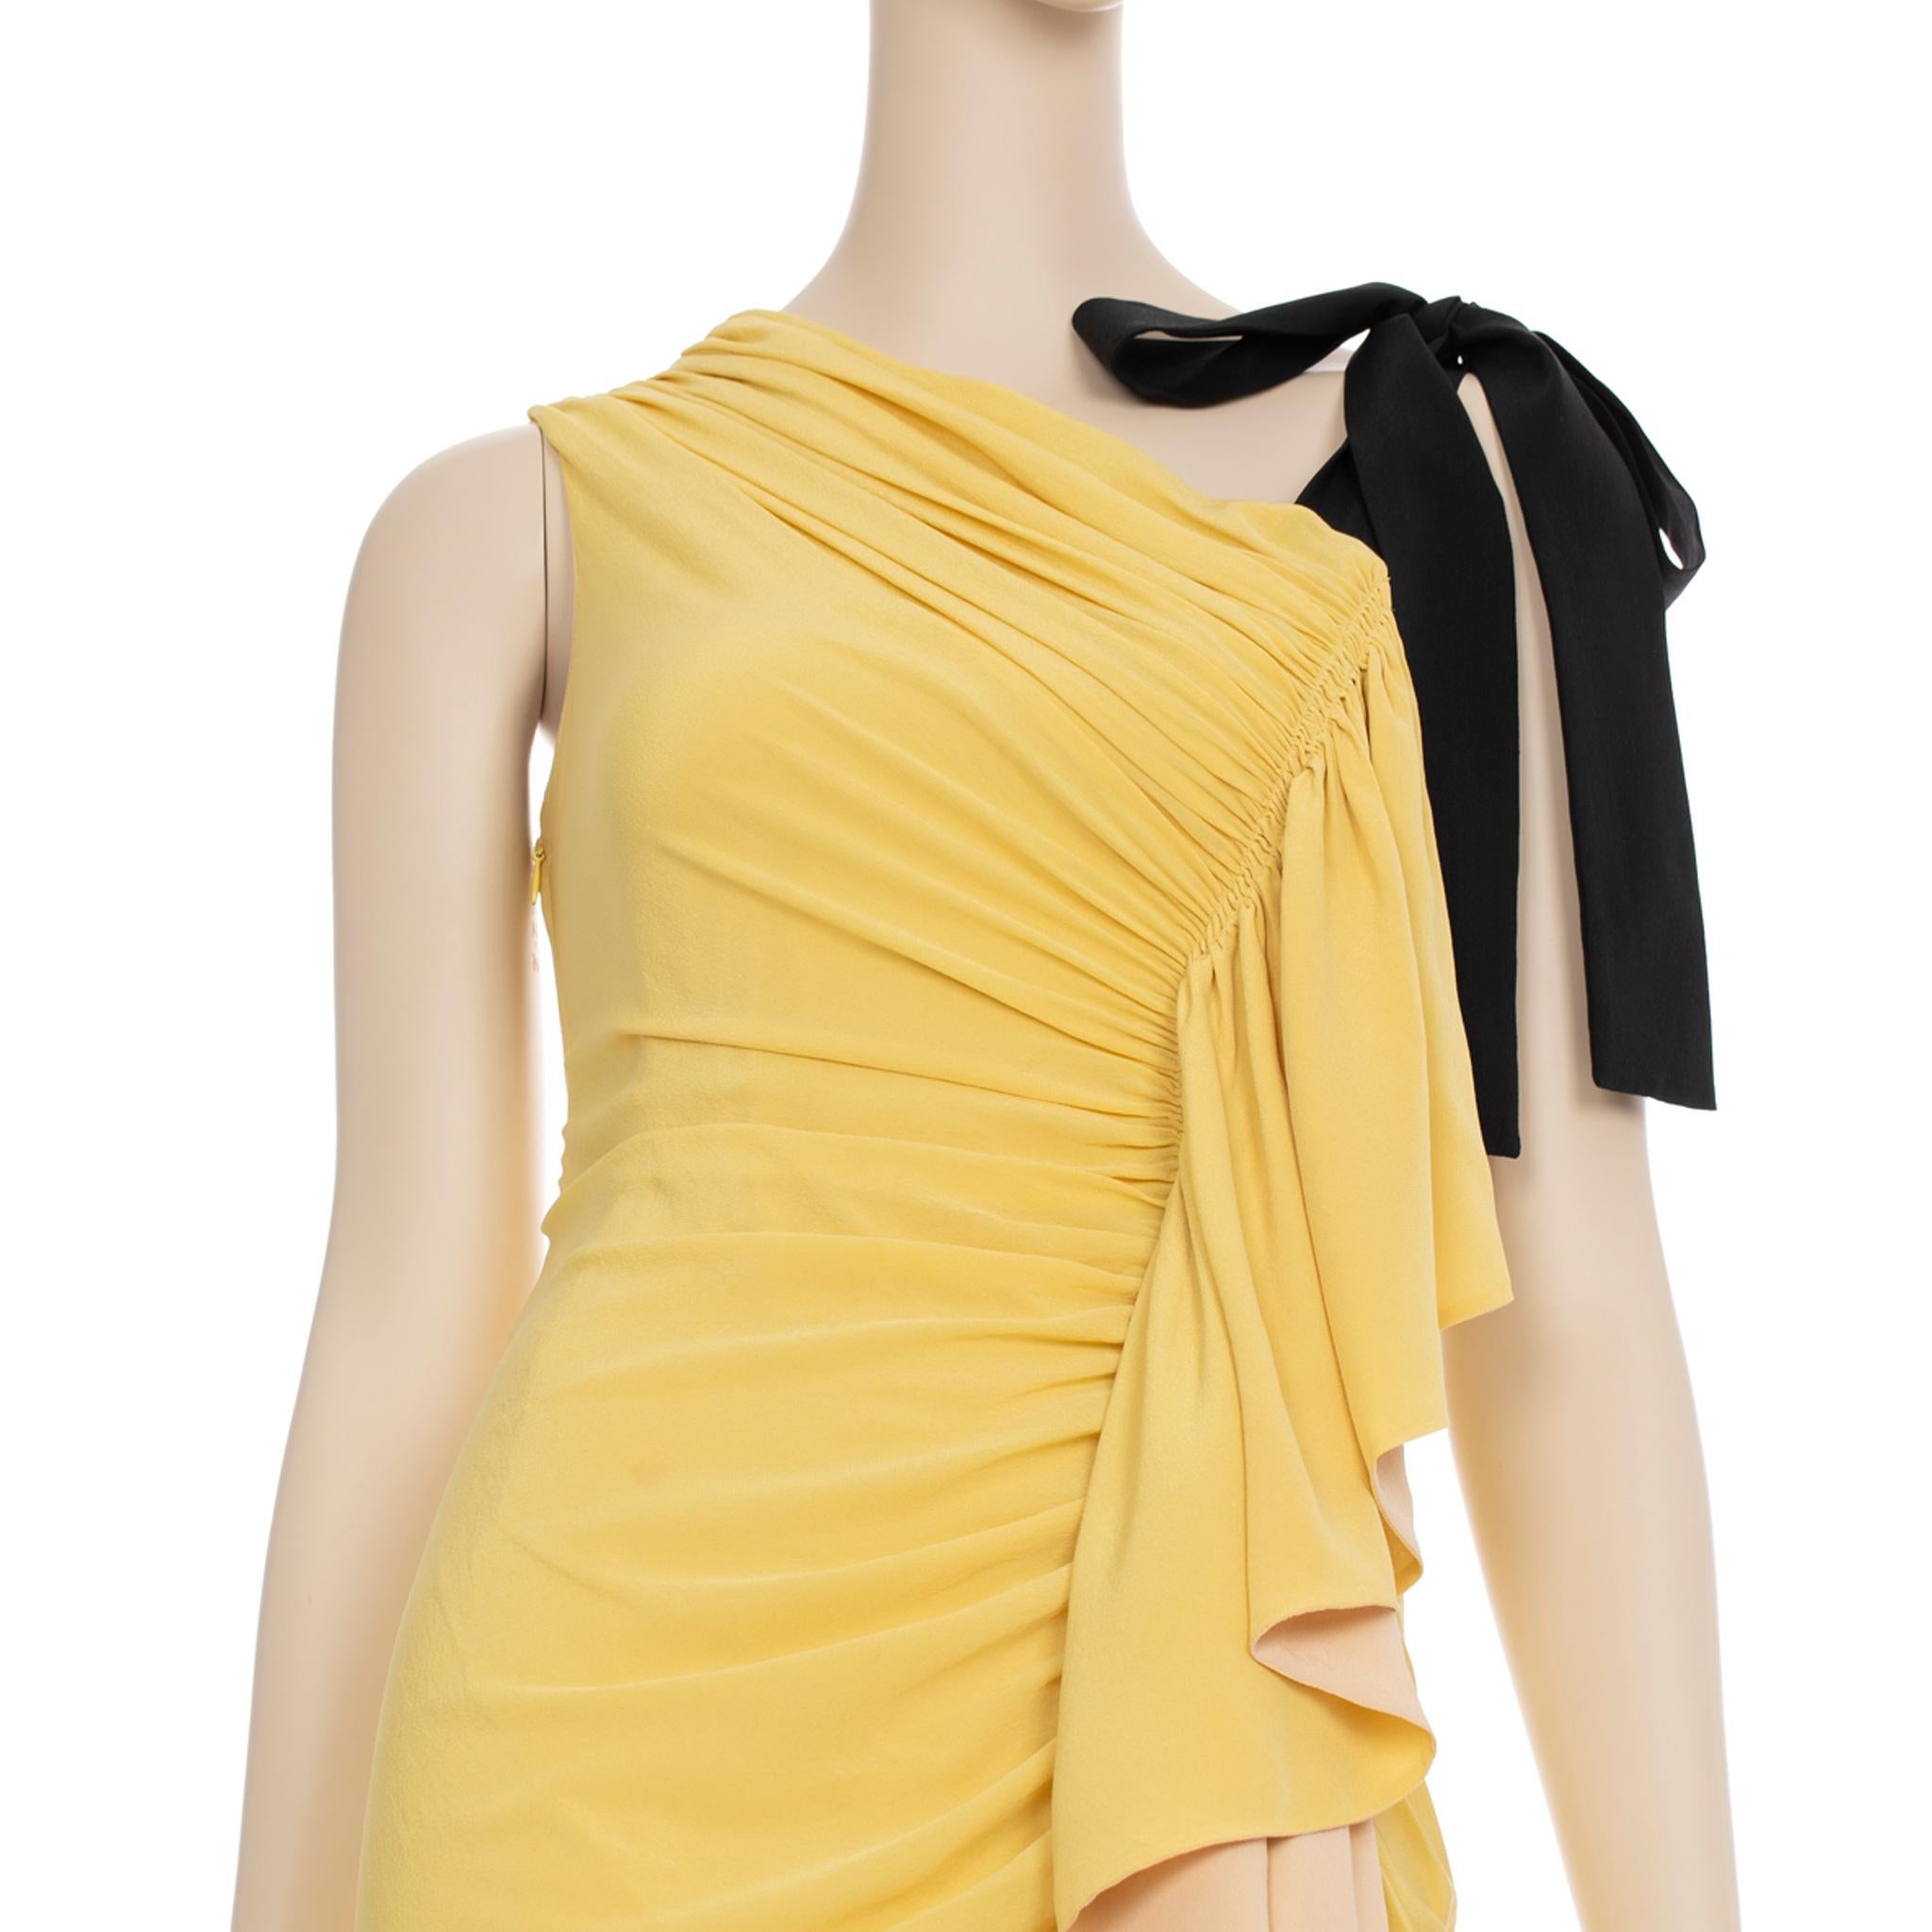 Fendi Vintage Yellow & Nude Dress 38 IT In Good Condition For Sale In DOUBLE BAY, NSW